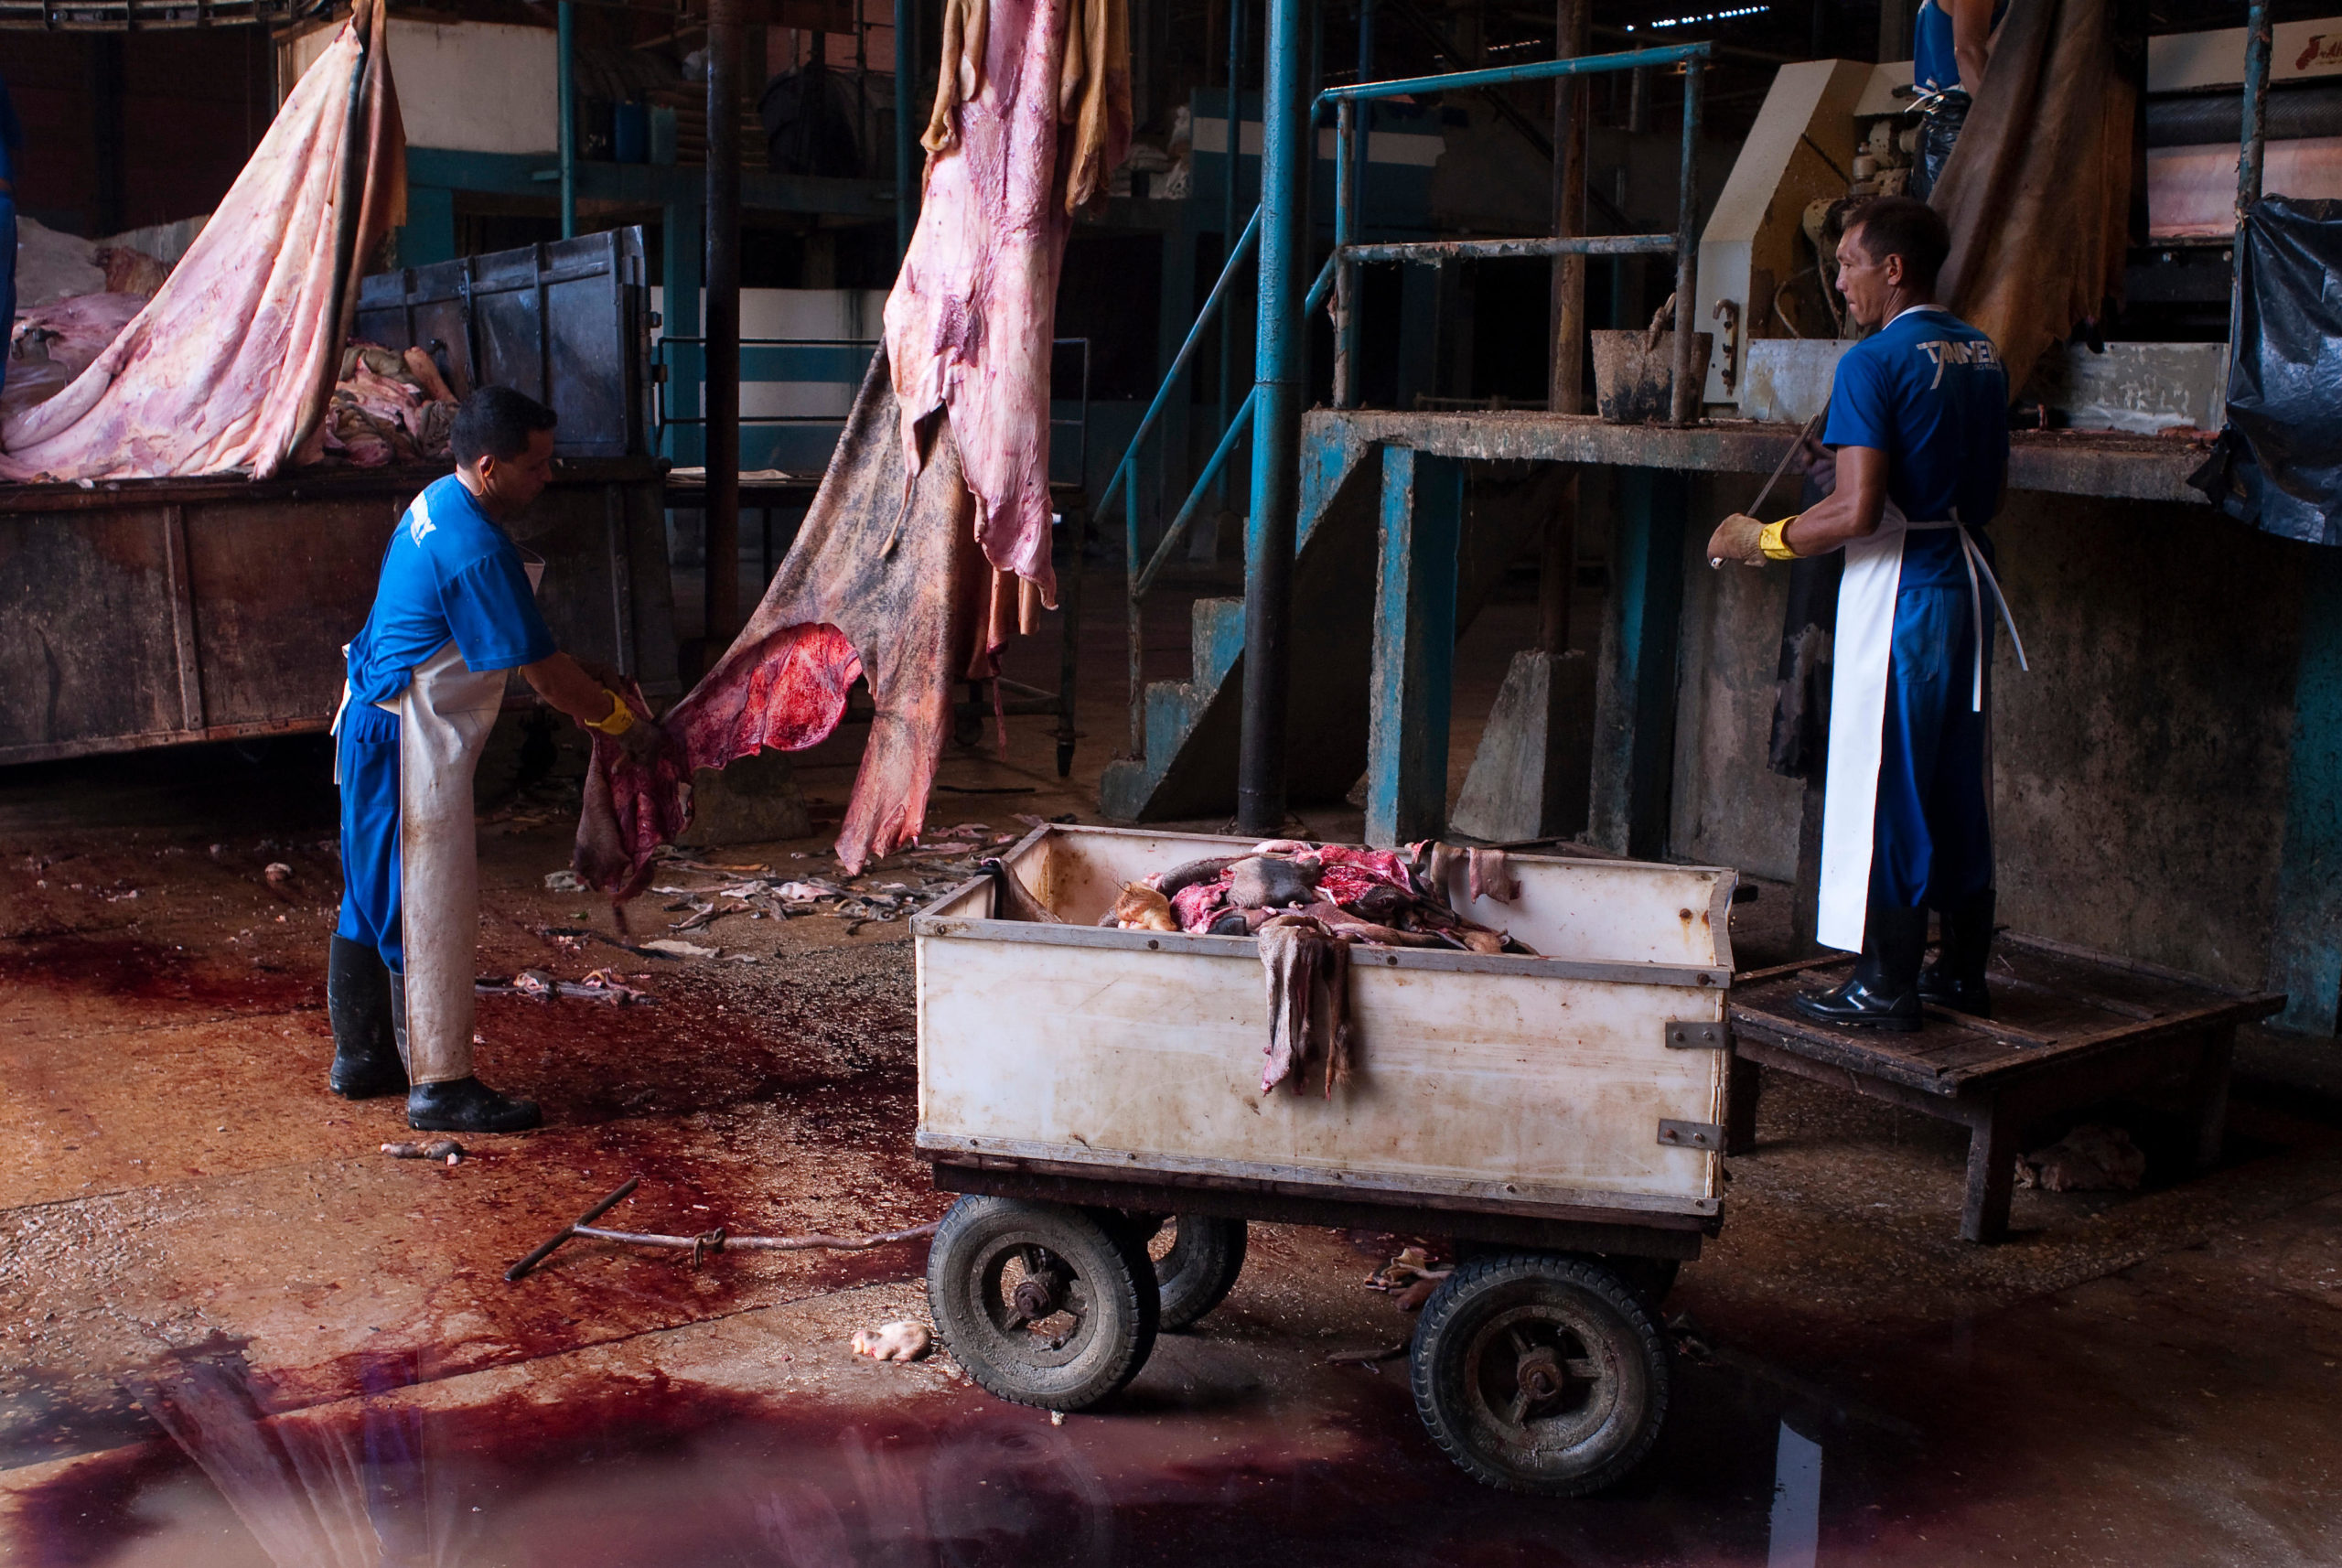 two men in workshop with strung up animal skins and bloody floor